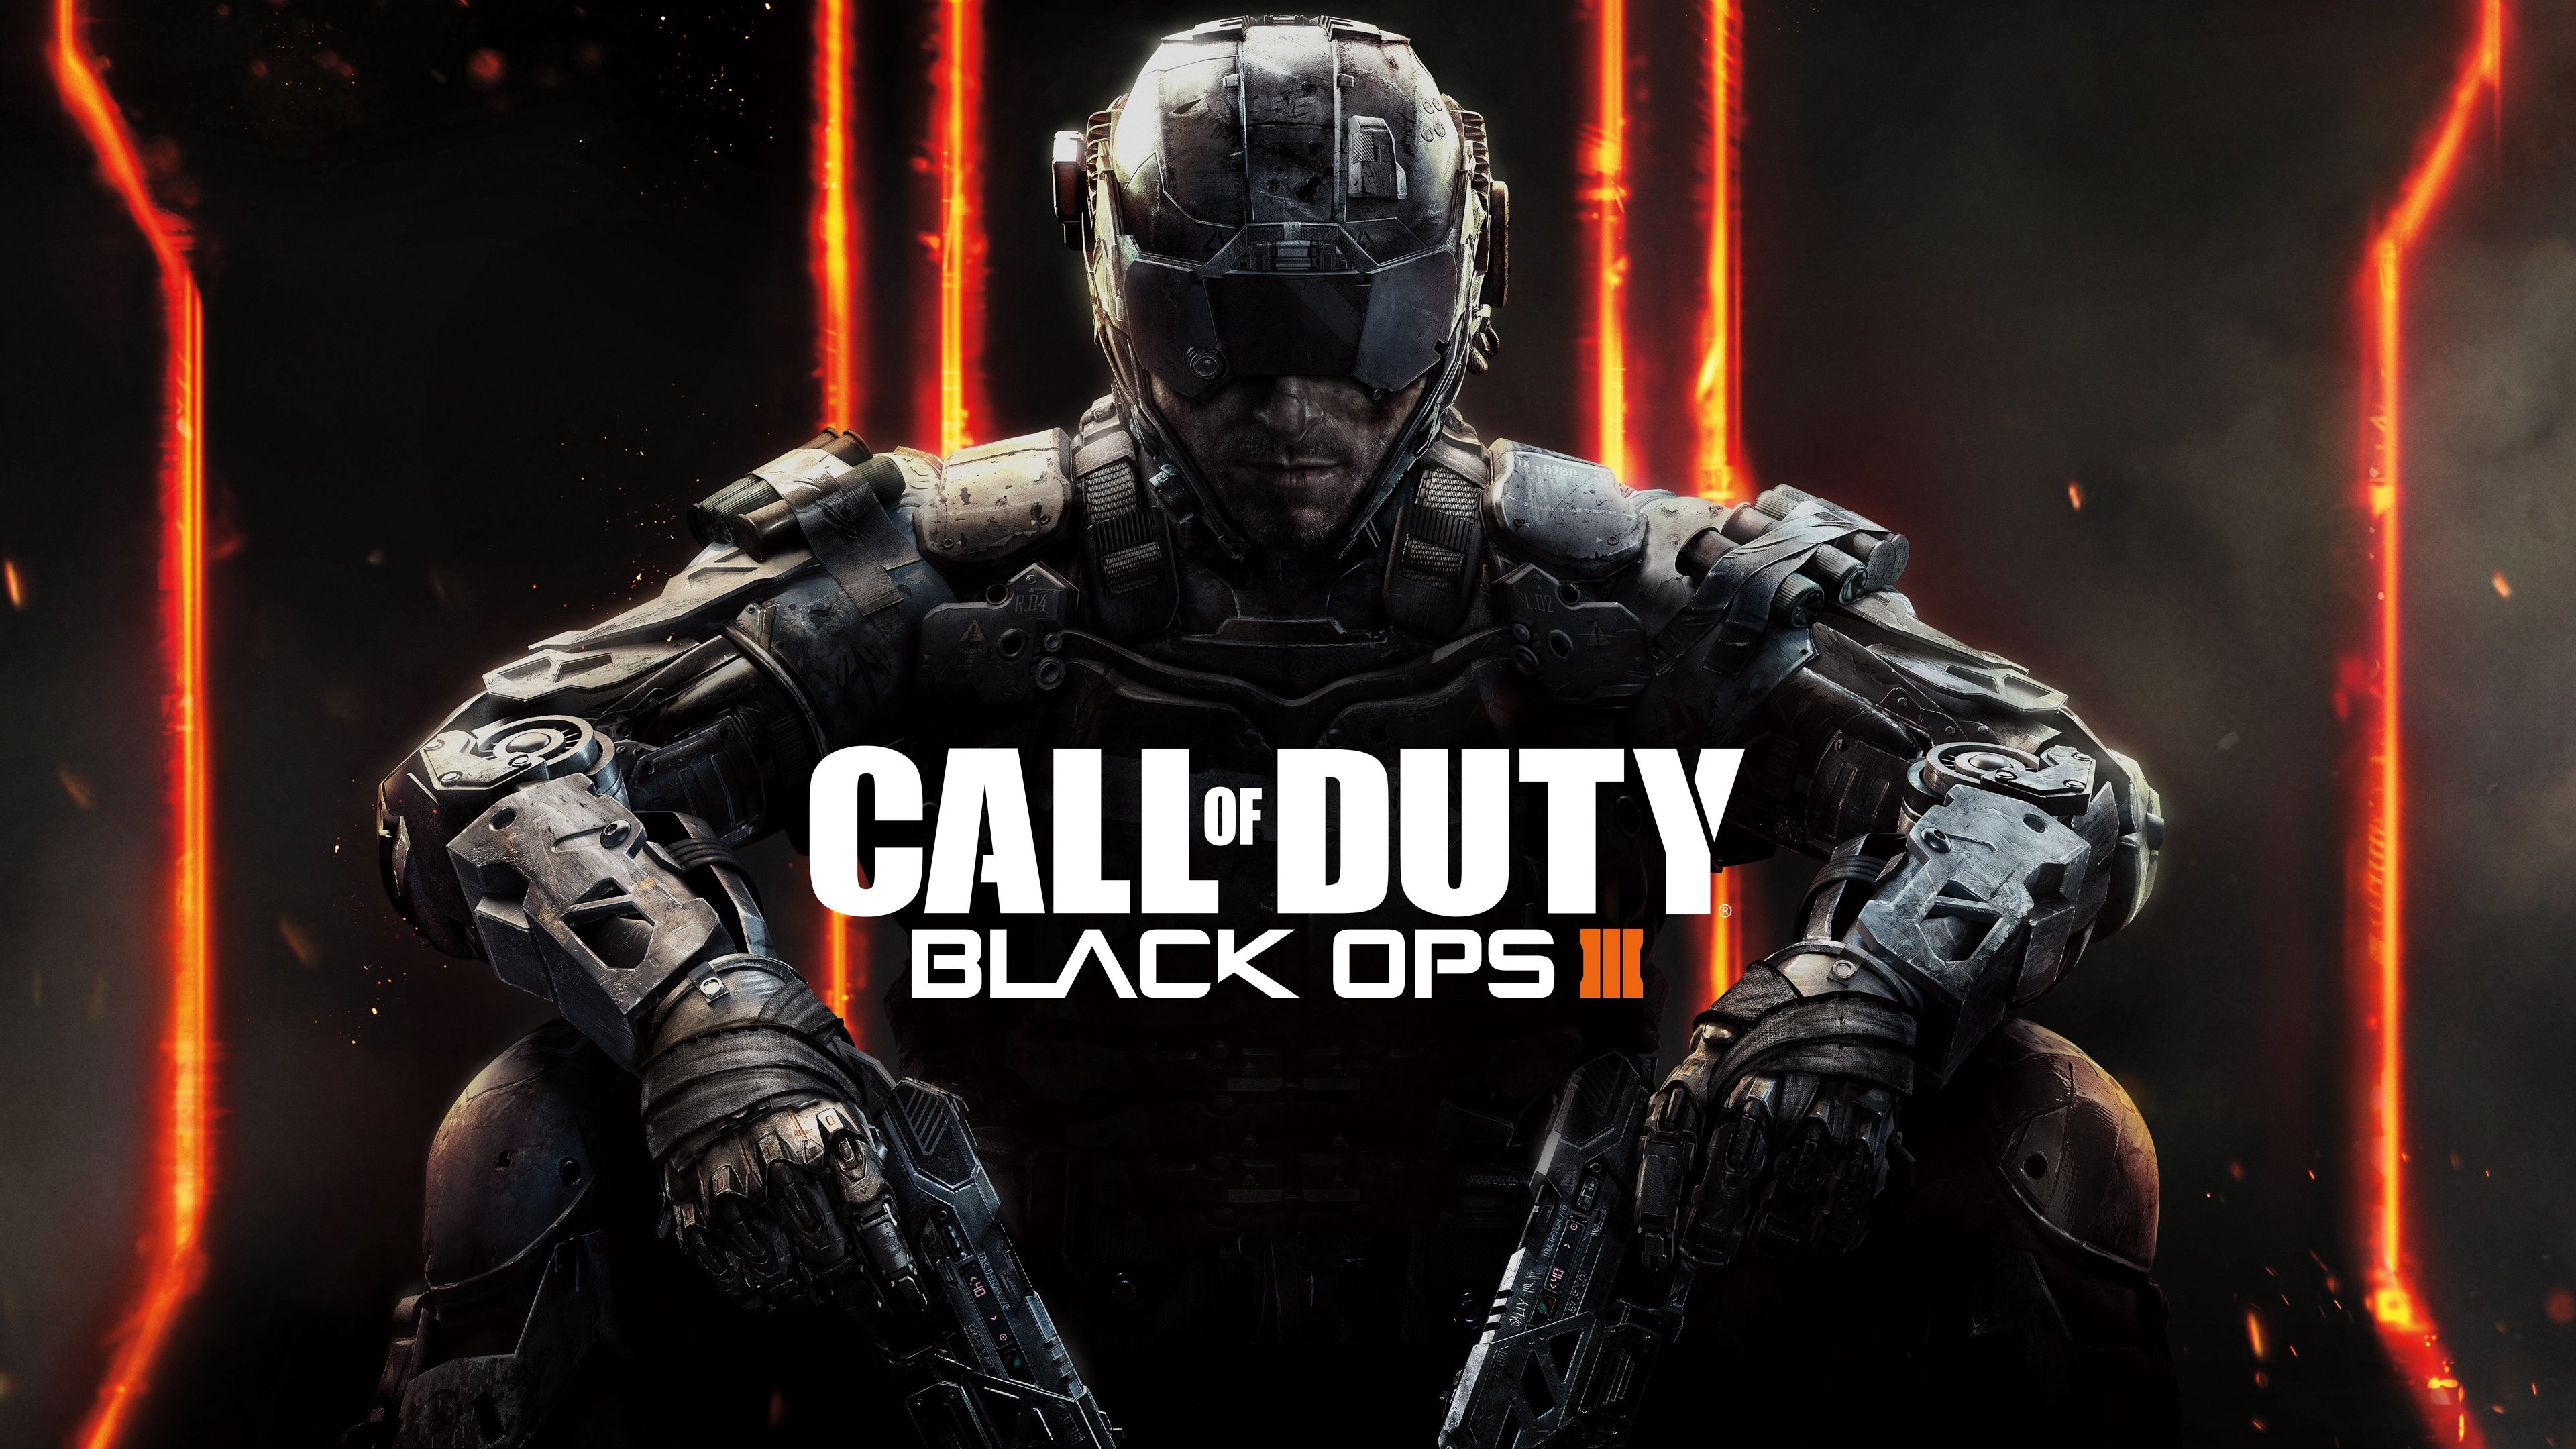 Call of Duty: Black Ops 3 HD wallpapers free download